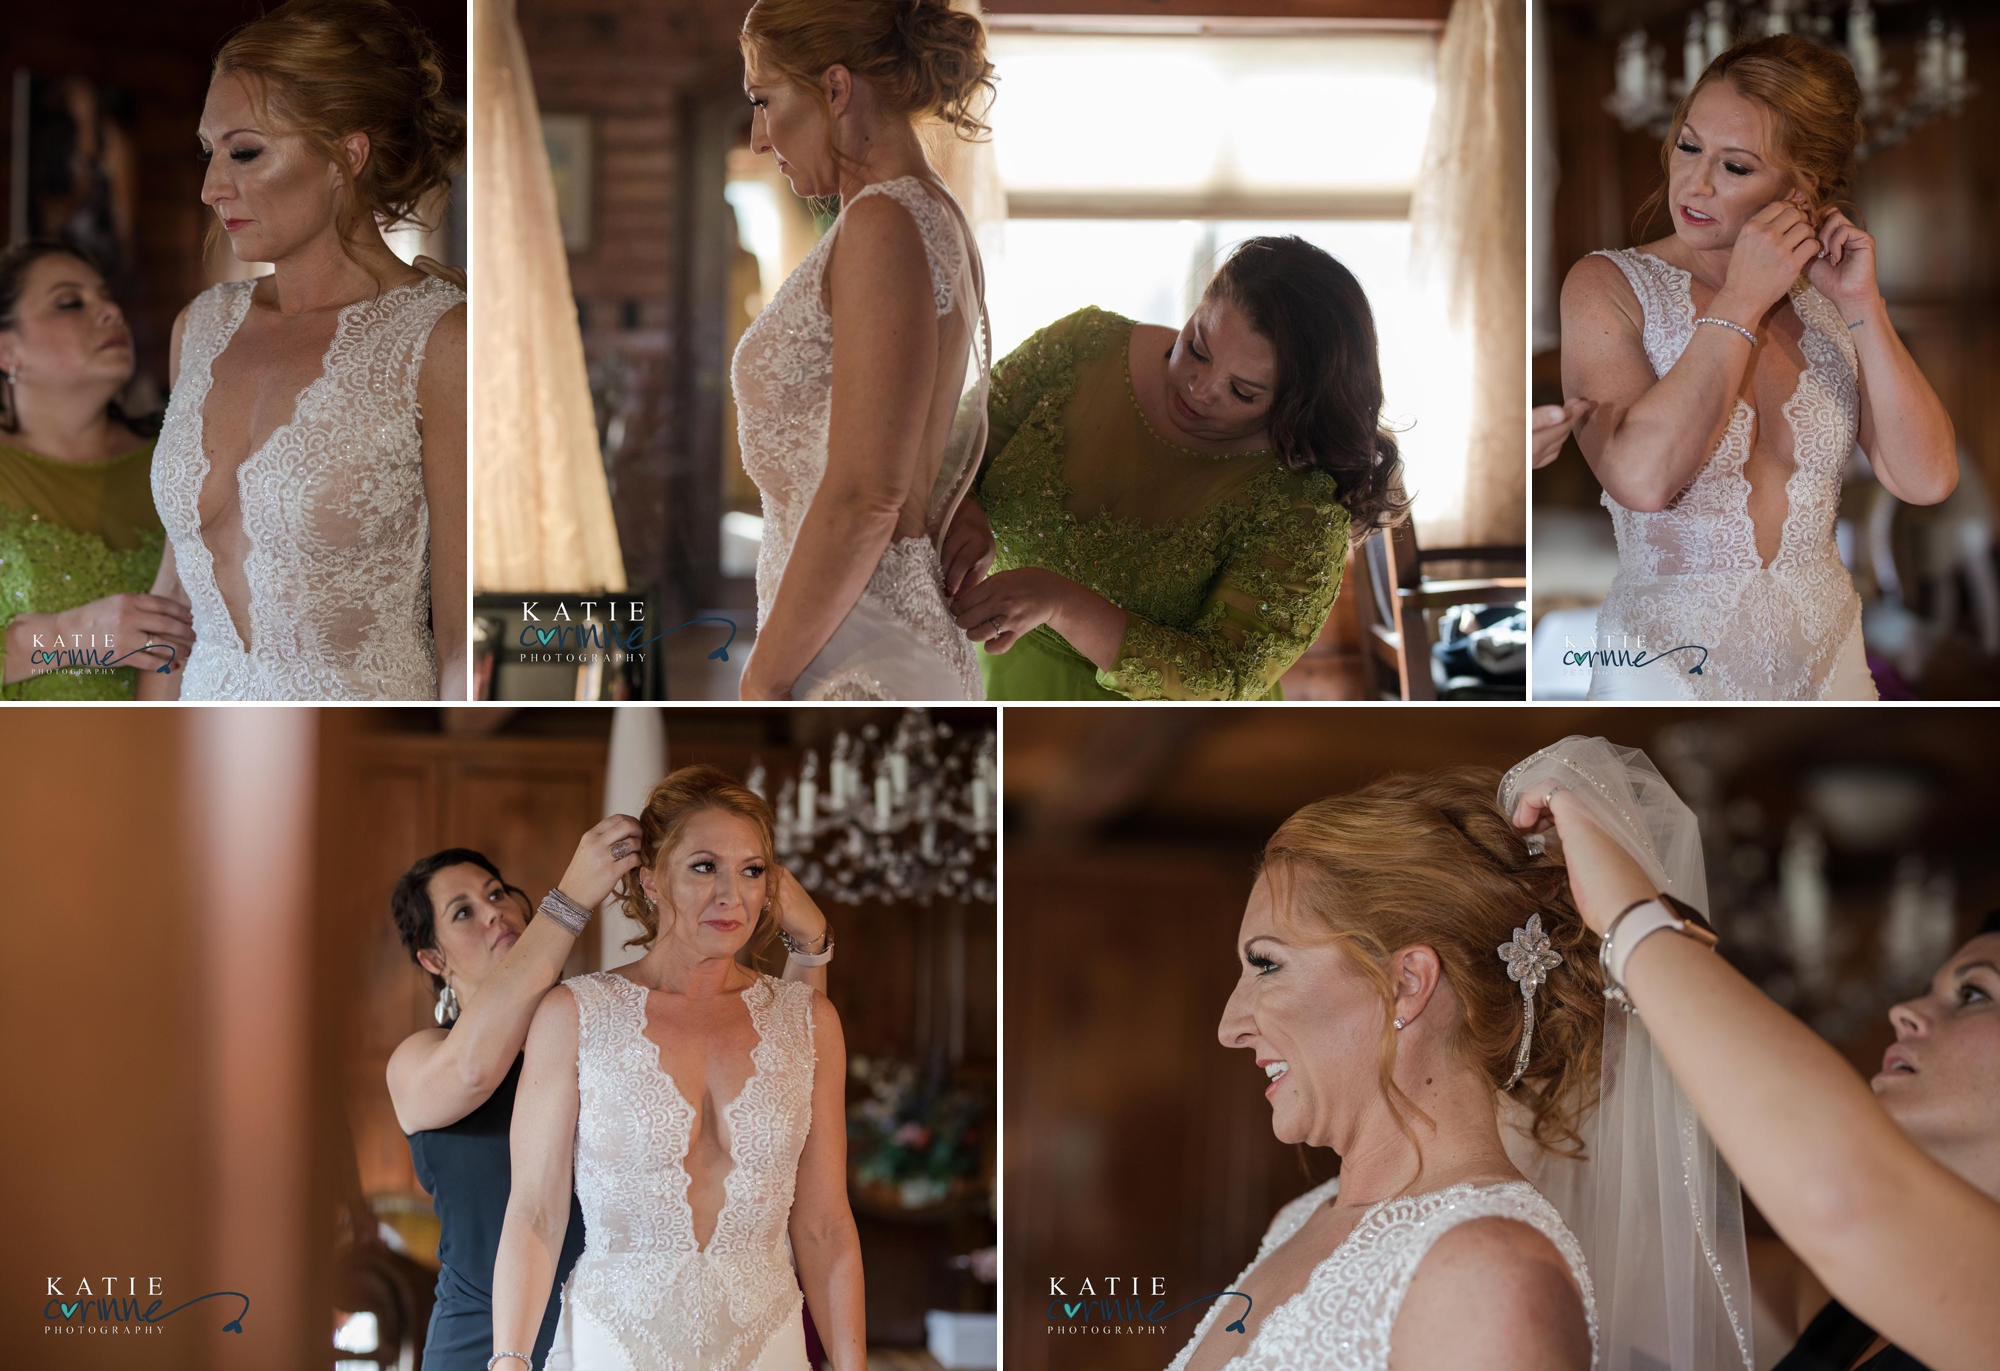 Bride preparing for wedding in bridal suite with mom and bridesmaids